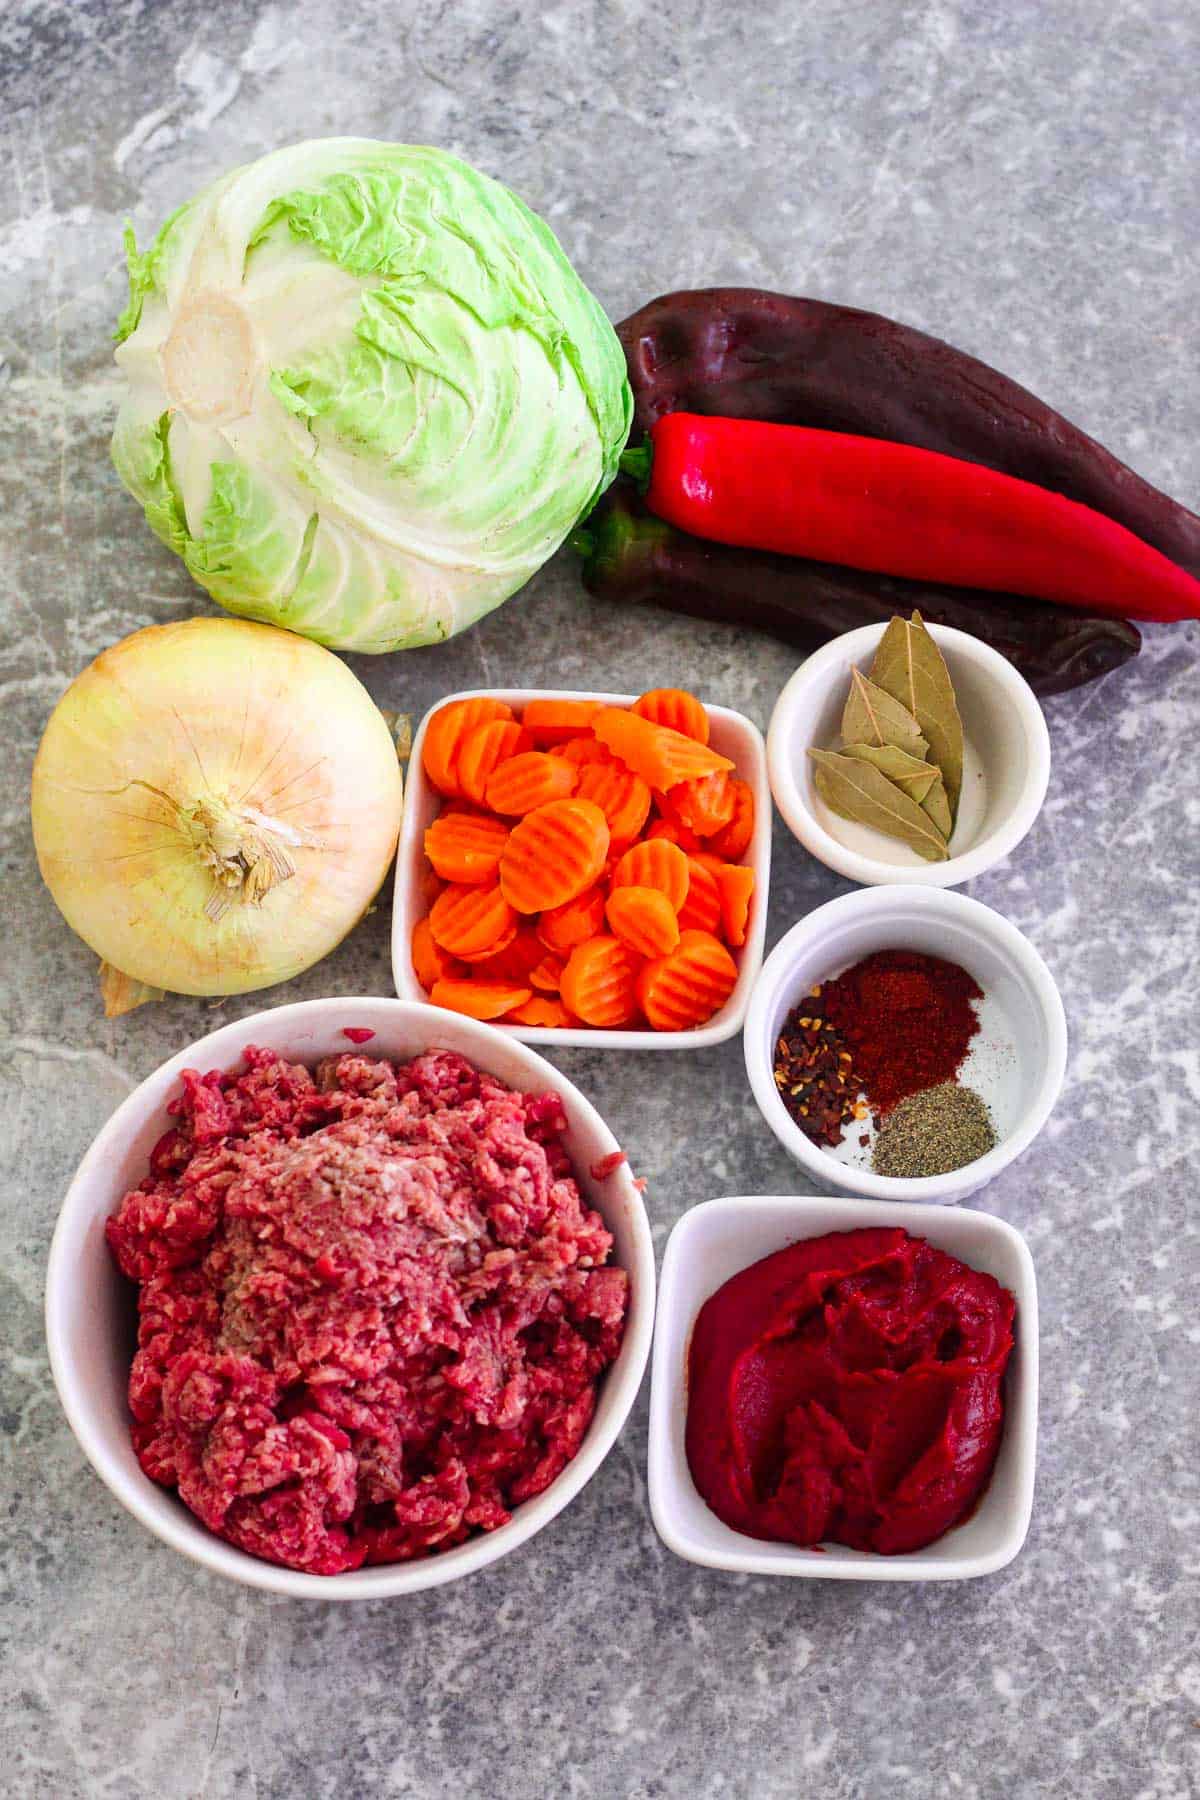 Ingredients for braised cabbage with ground beef: cabbage, peppers, onion, carrots, bay leaves, ground beef, paprika, black pepper, crushed red pepper, tomato paste.